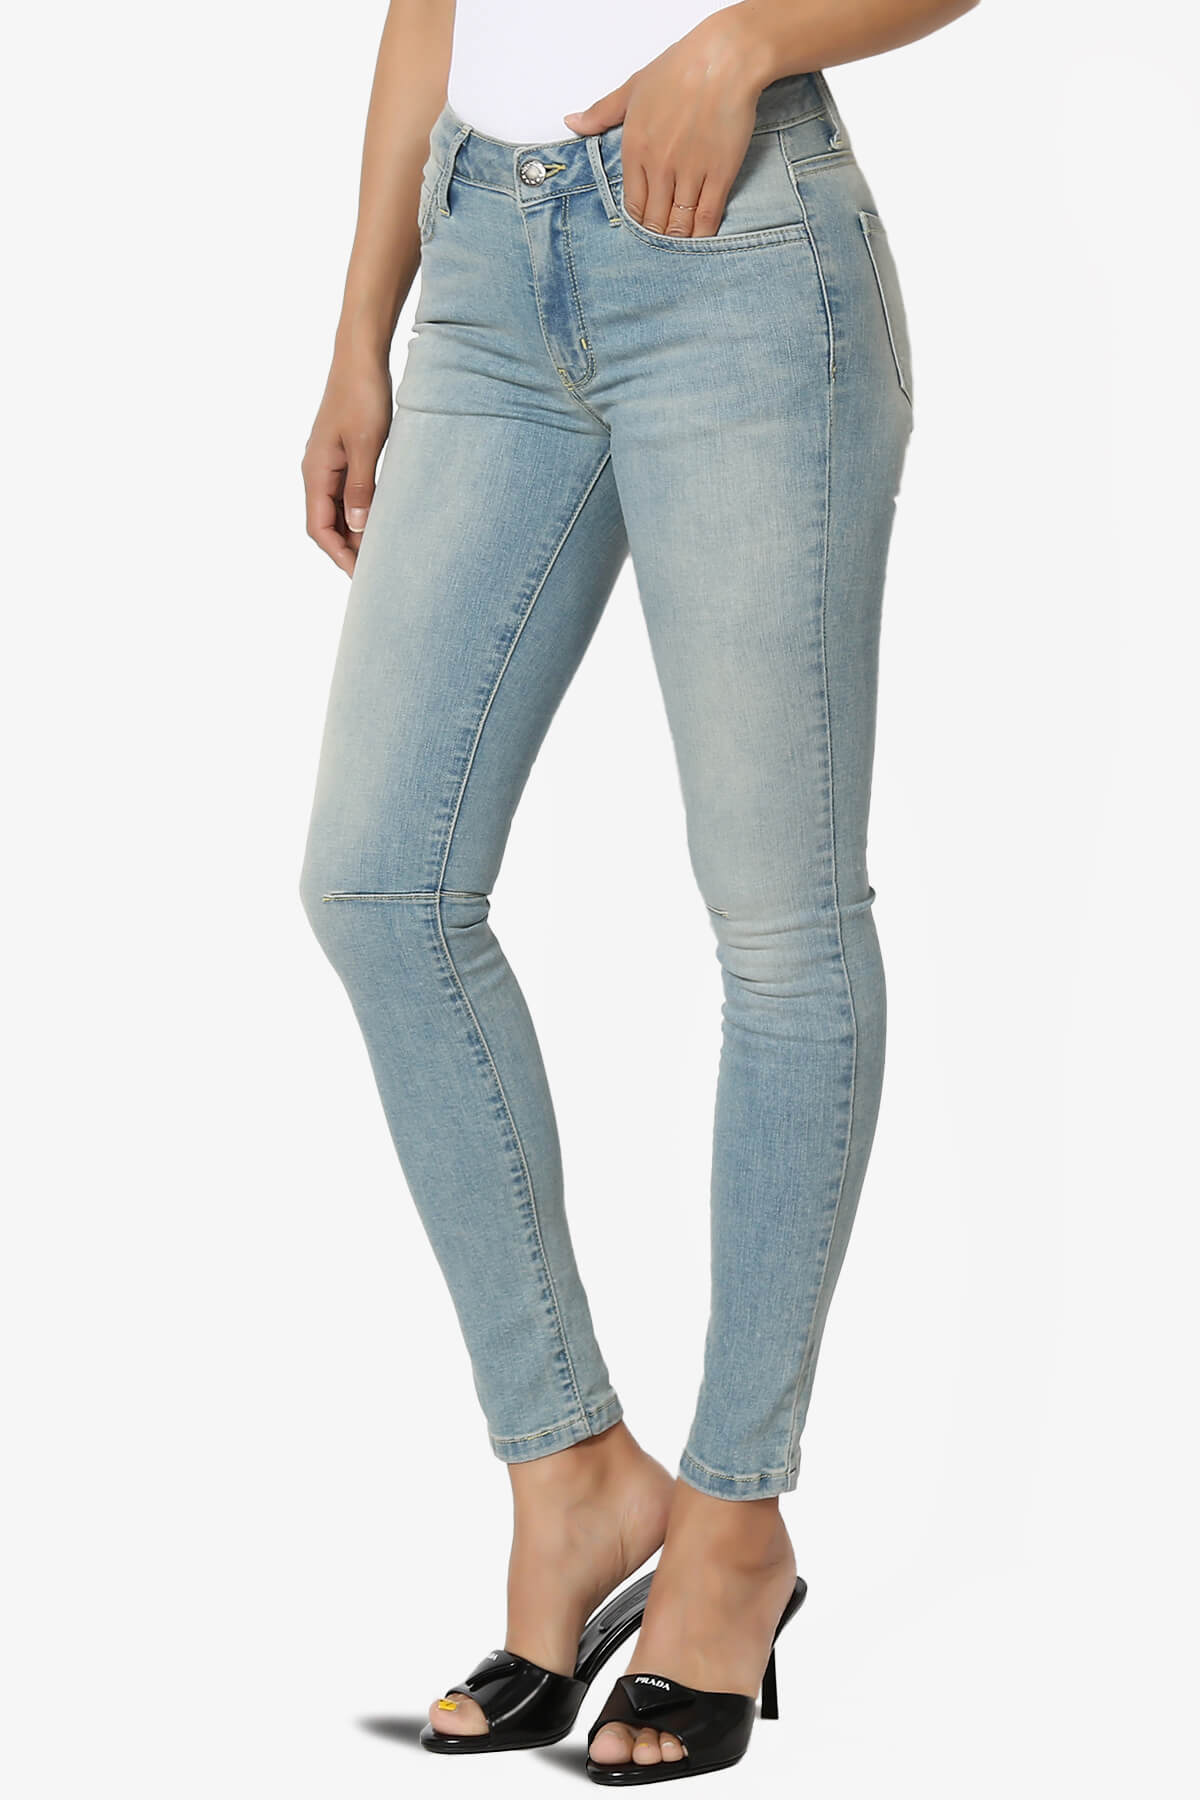 Load image into Gallery viewer, Jigott Knee Dart Washed Skinny Jeans LIGHT_3
